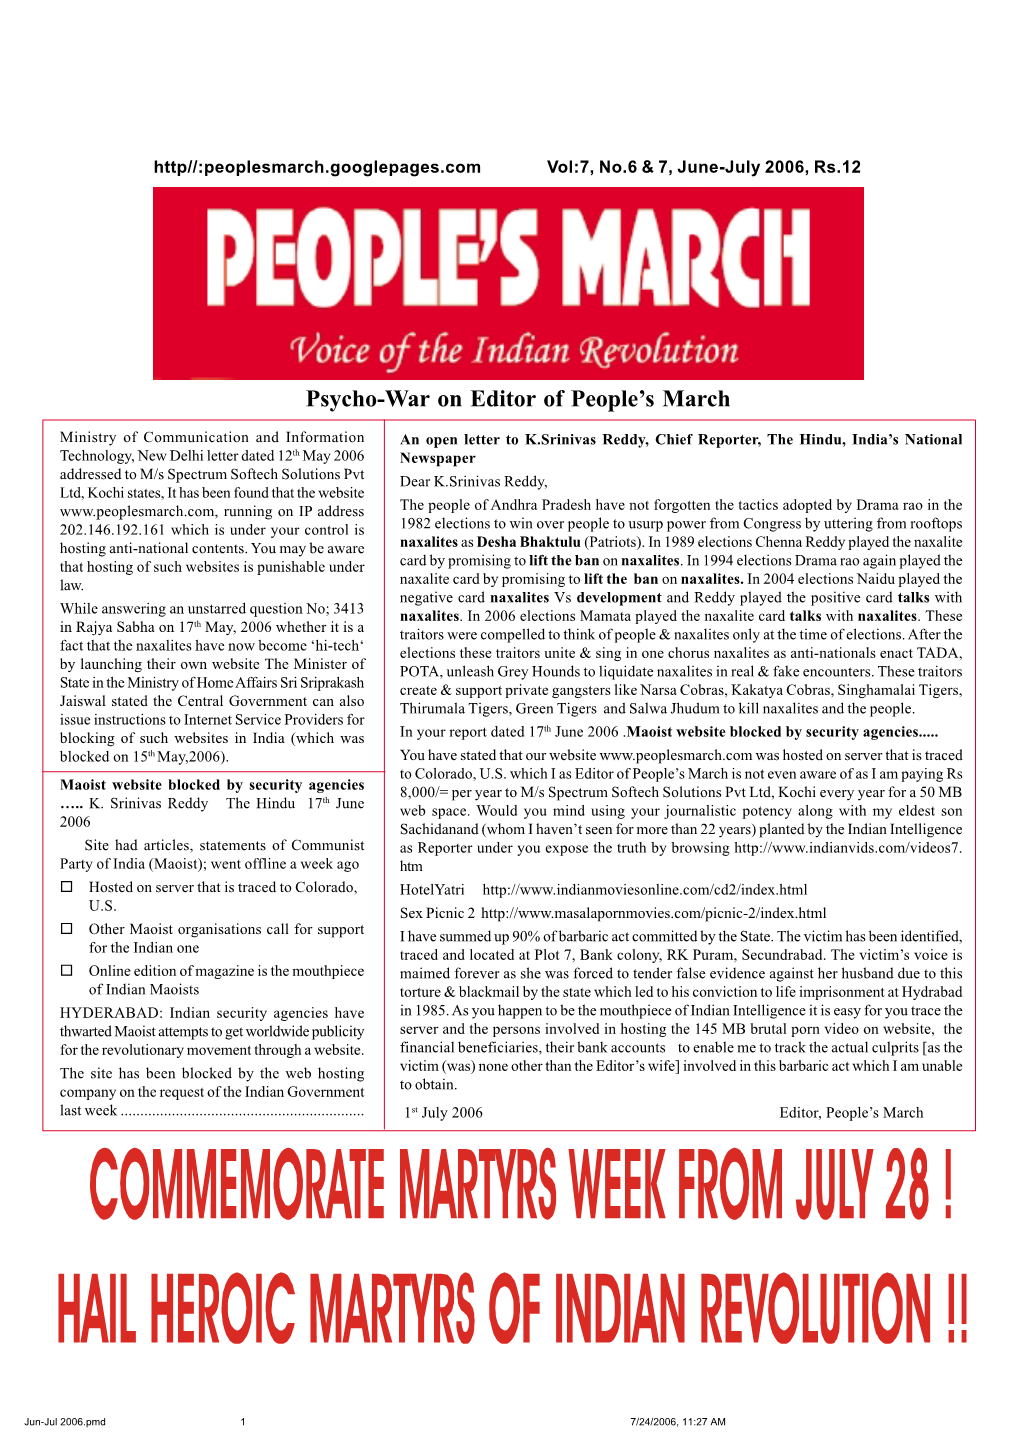 Psycho-War on Editor of People's March